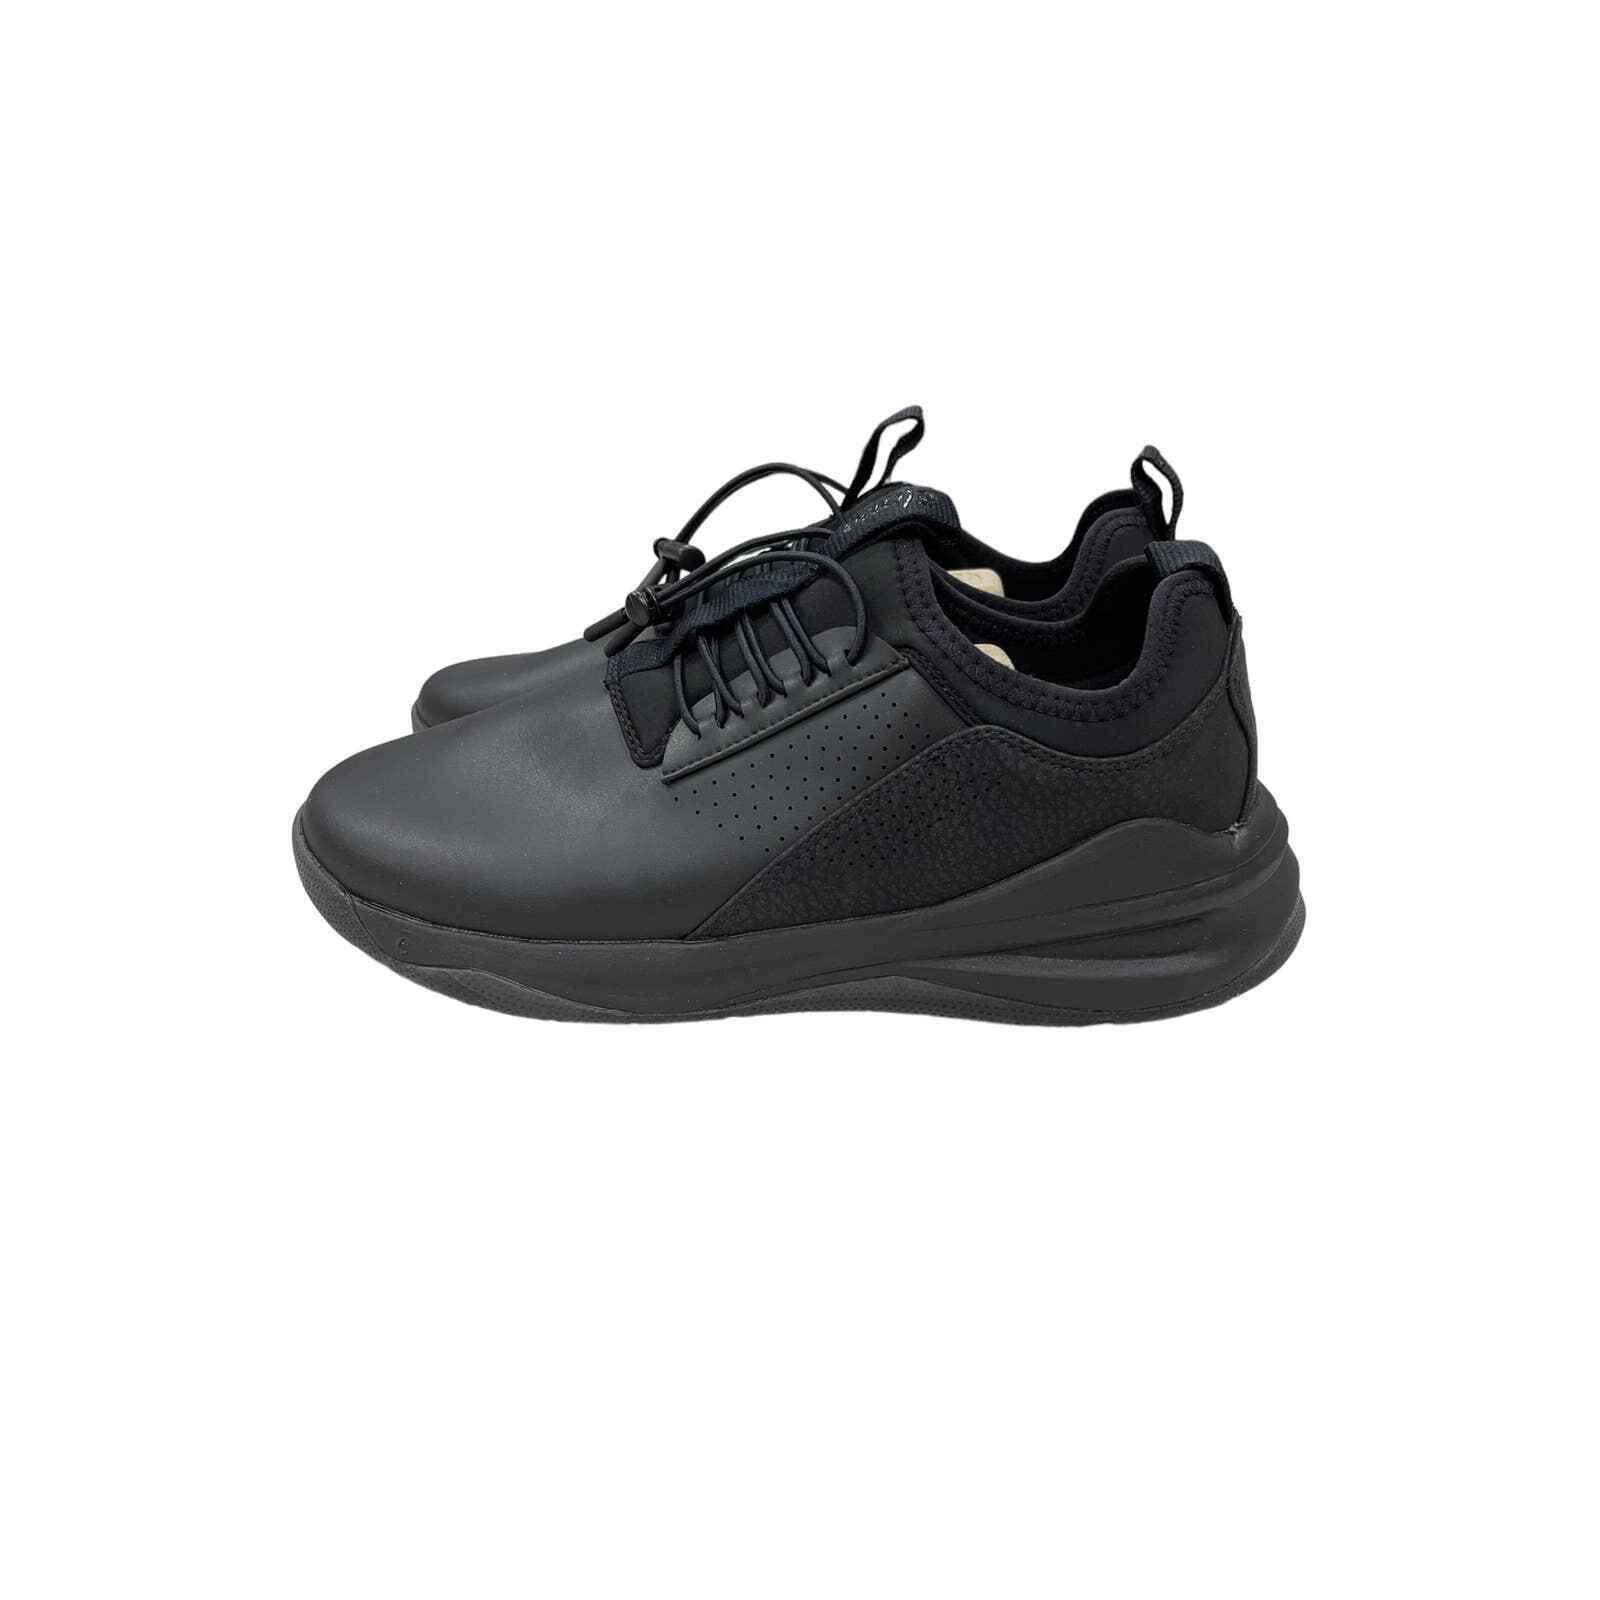 Clove Classic Healthcare Nursing Shoes - All Black Option, Size 7 New Sneakers - Premium Clothing, Shoes & Accessories:Women:Women's Shoes:Athletic Shoes from Clove - Just $99.99! Shop now at Finds For You